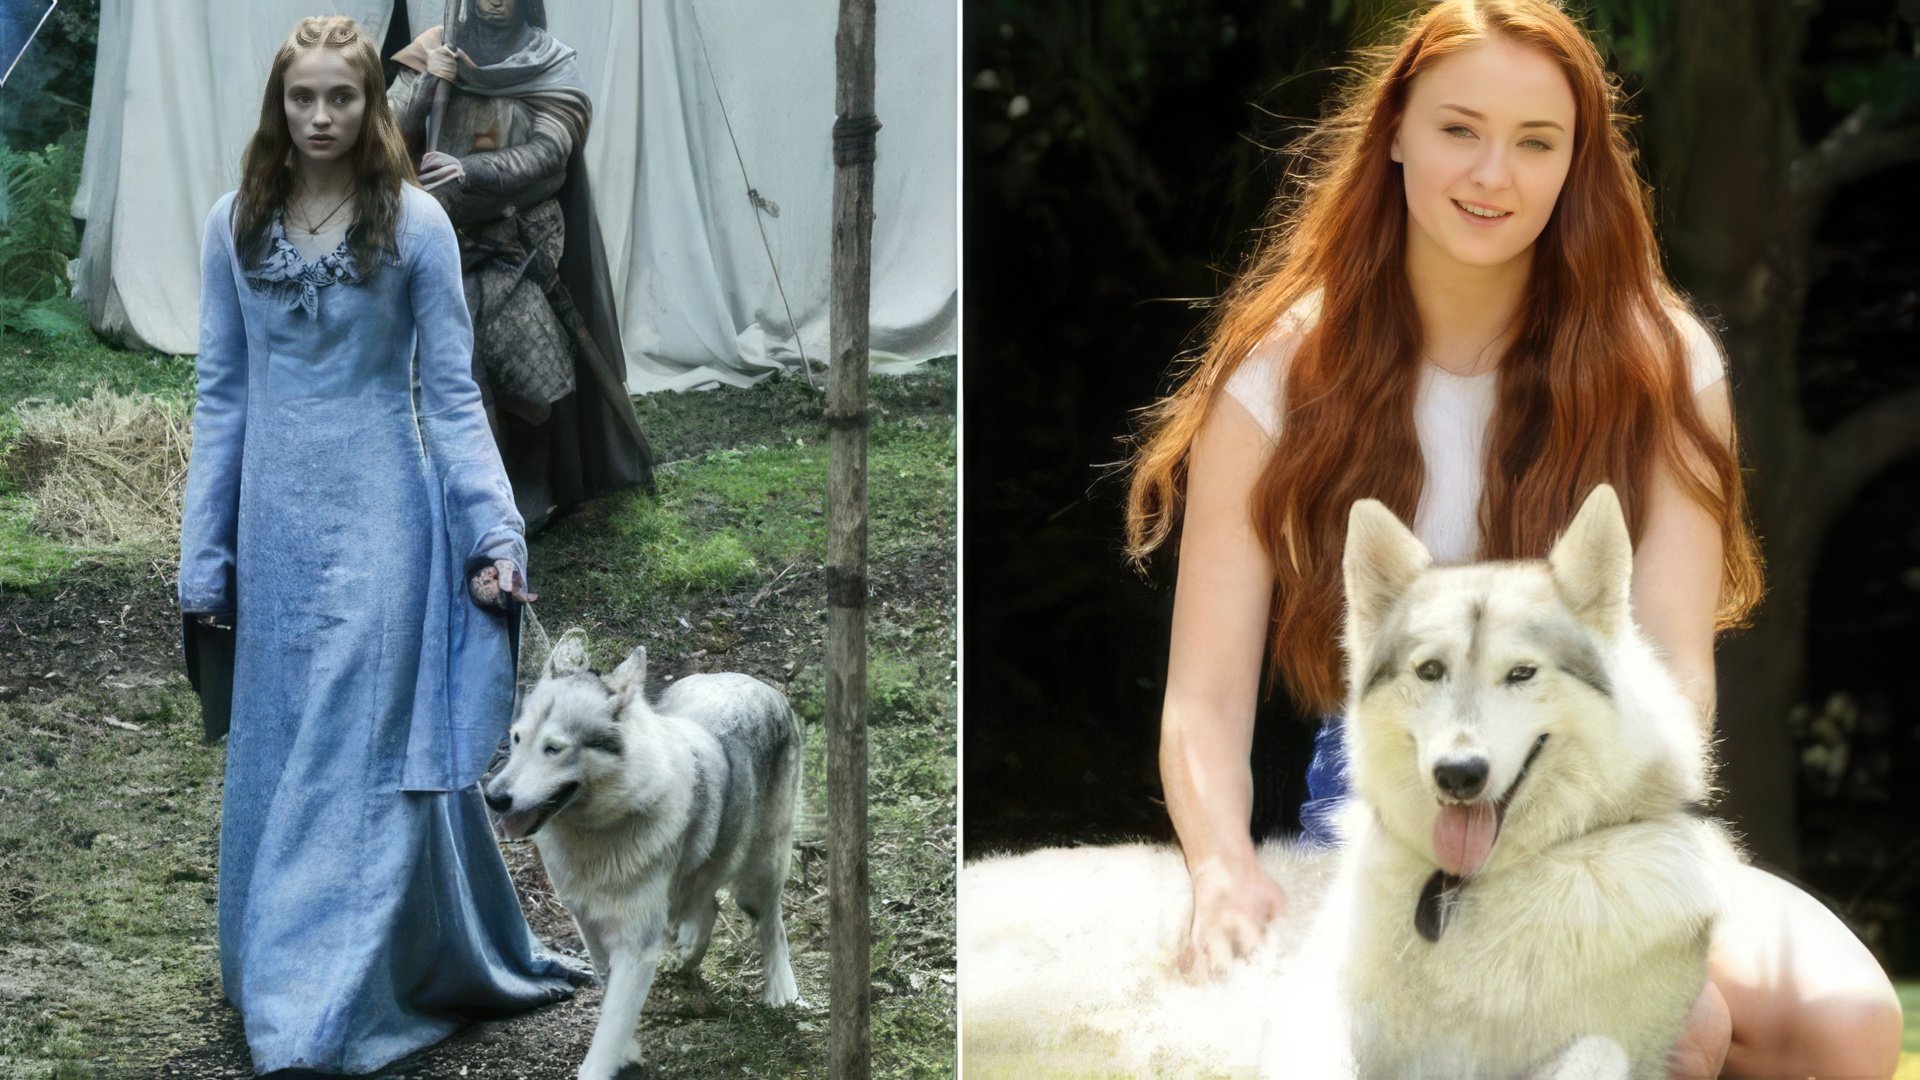 Sansa Stark and her dire wolf Lady outside the set